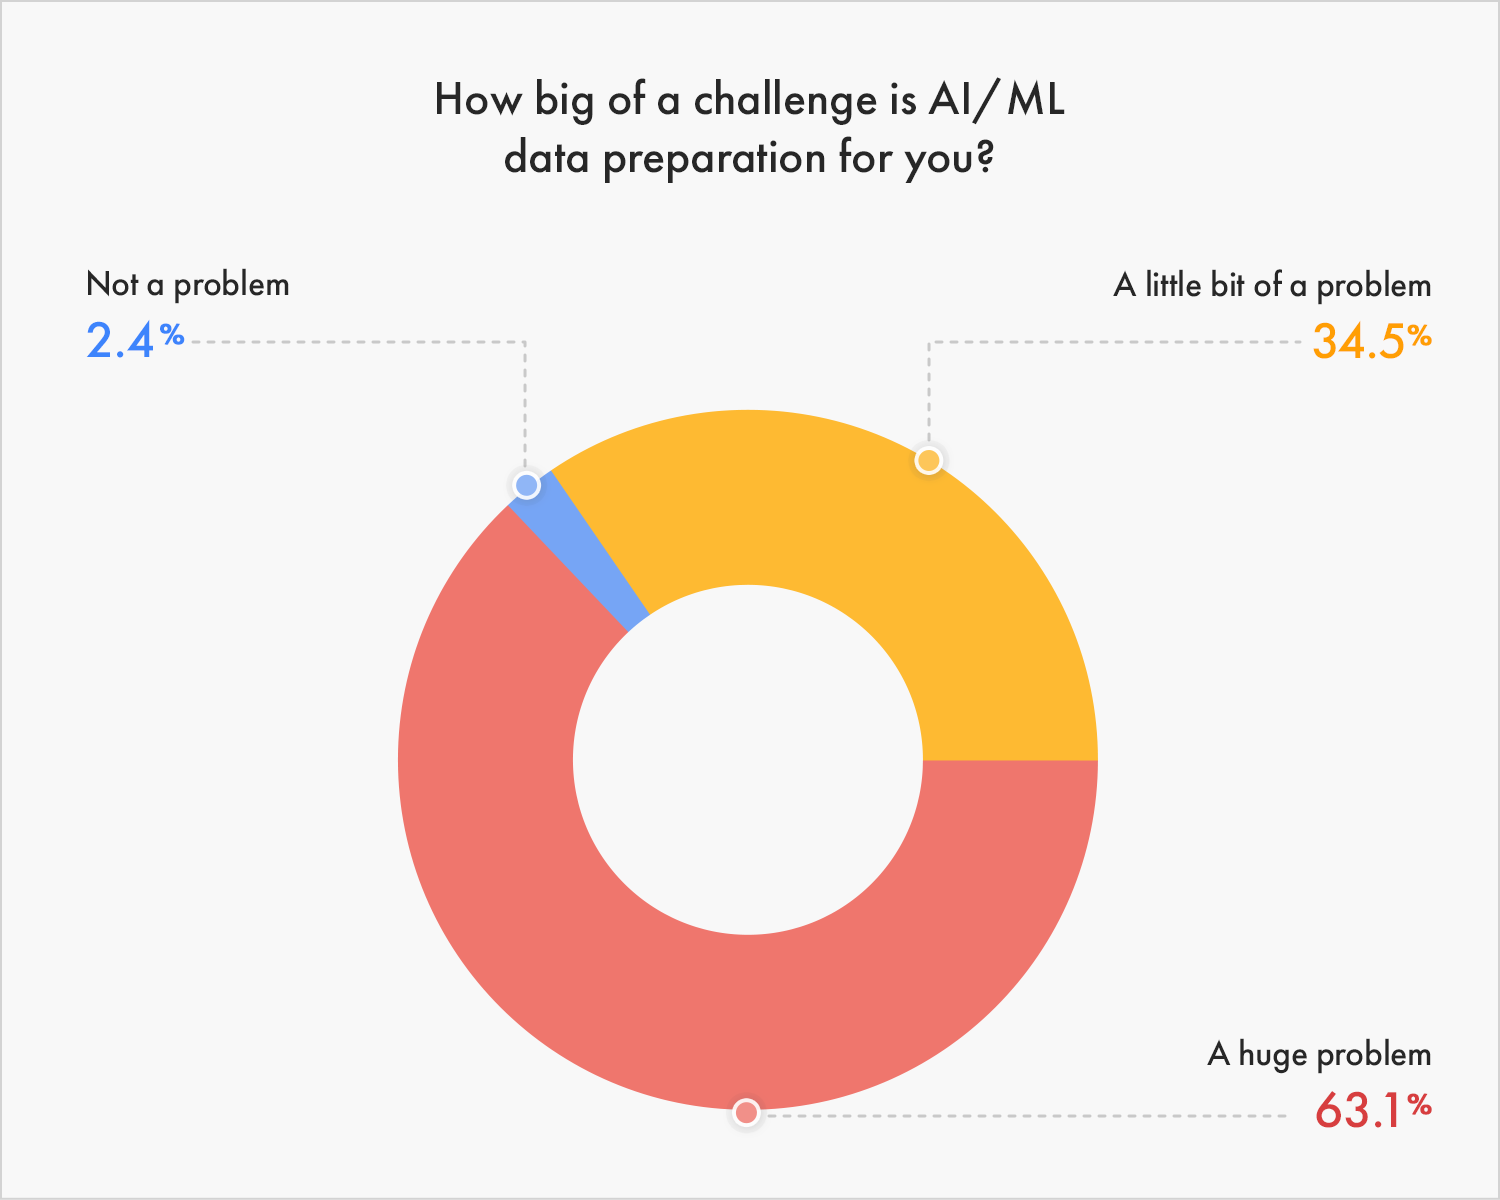 We surveyed recent webinar attendees about how challenging data preparation is for them. 63.1% said that it is a huge problem and only 2.4% said that data prep is not a problem.